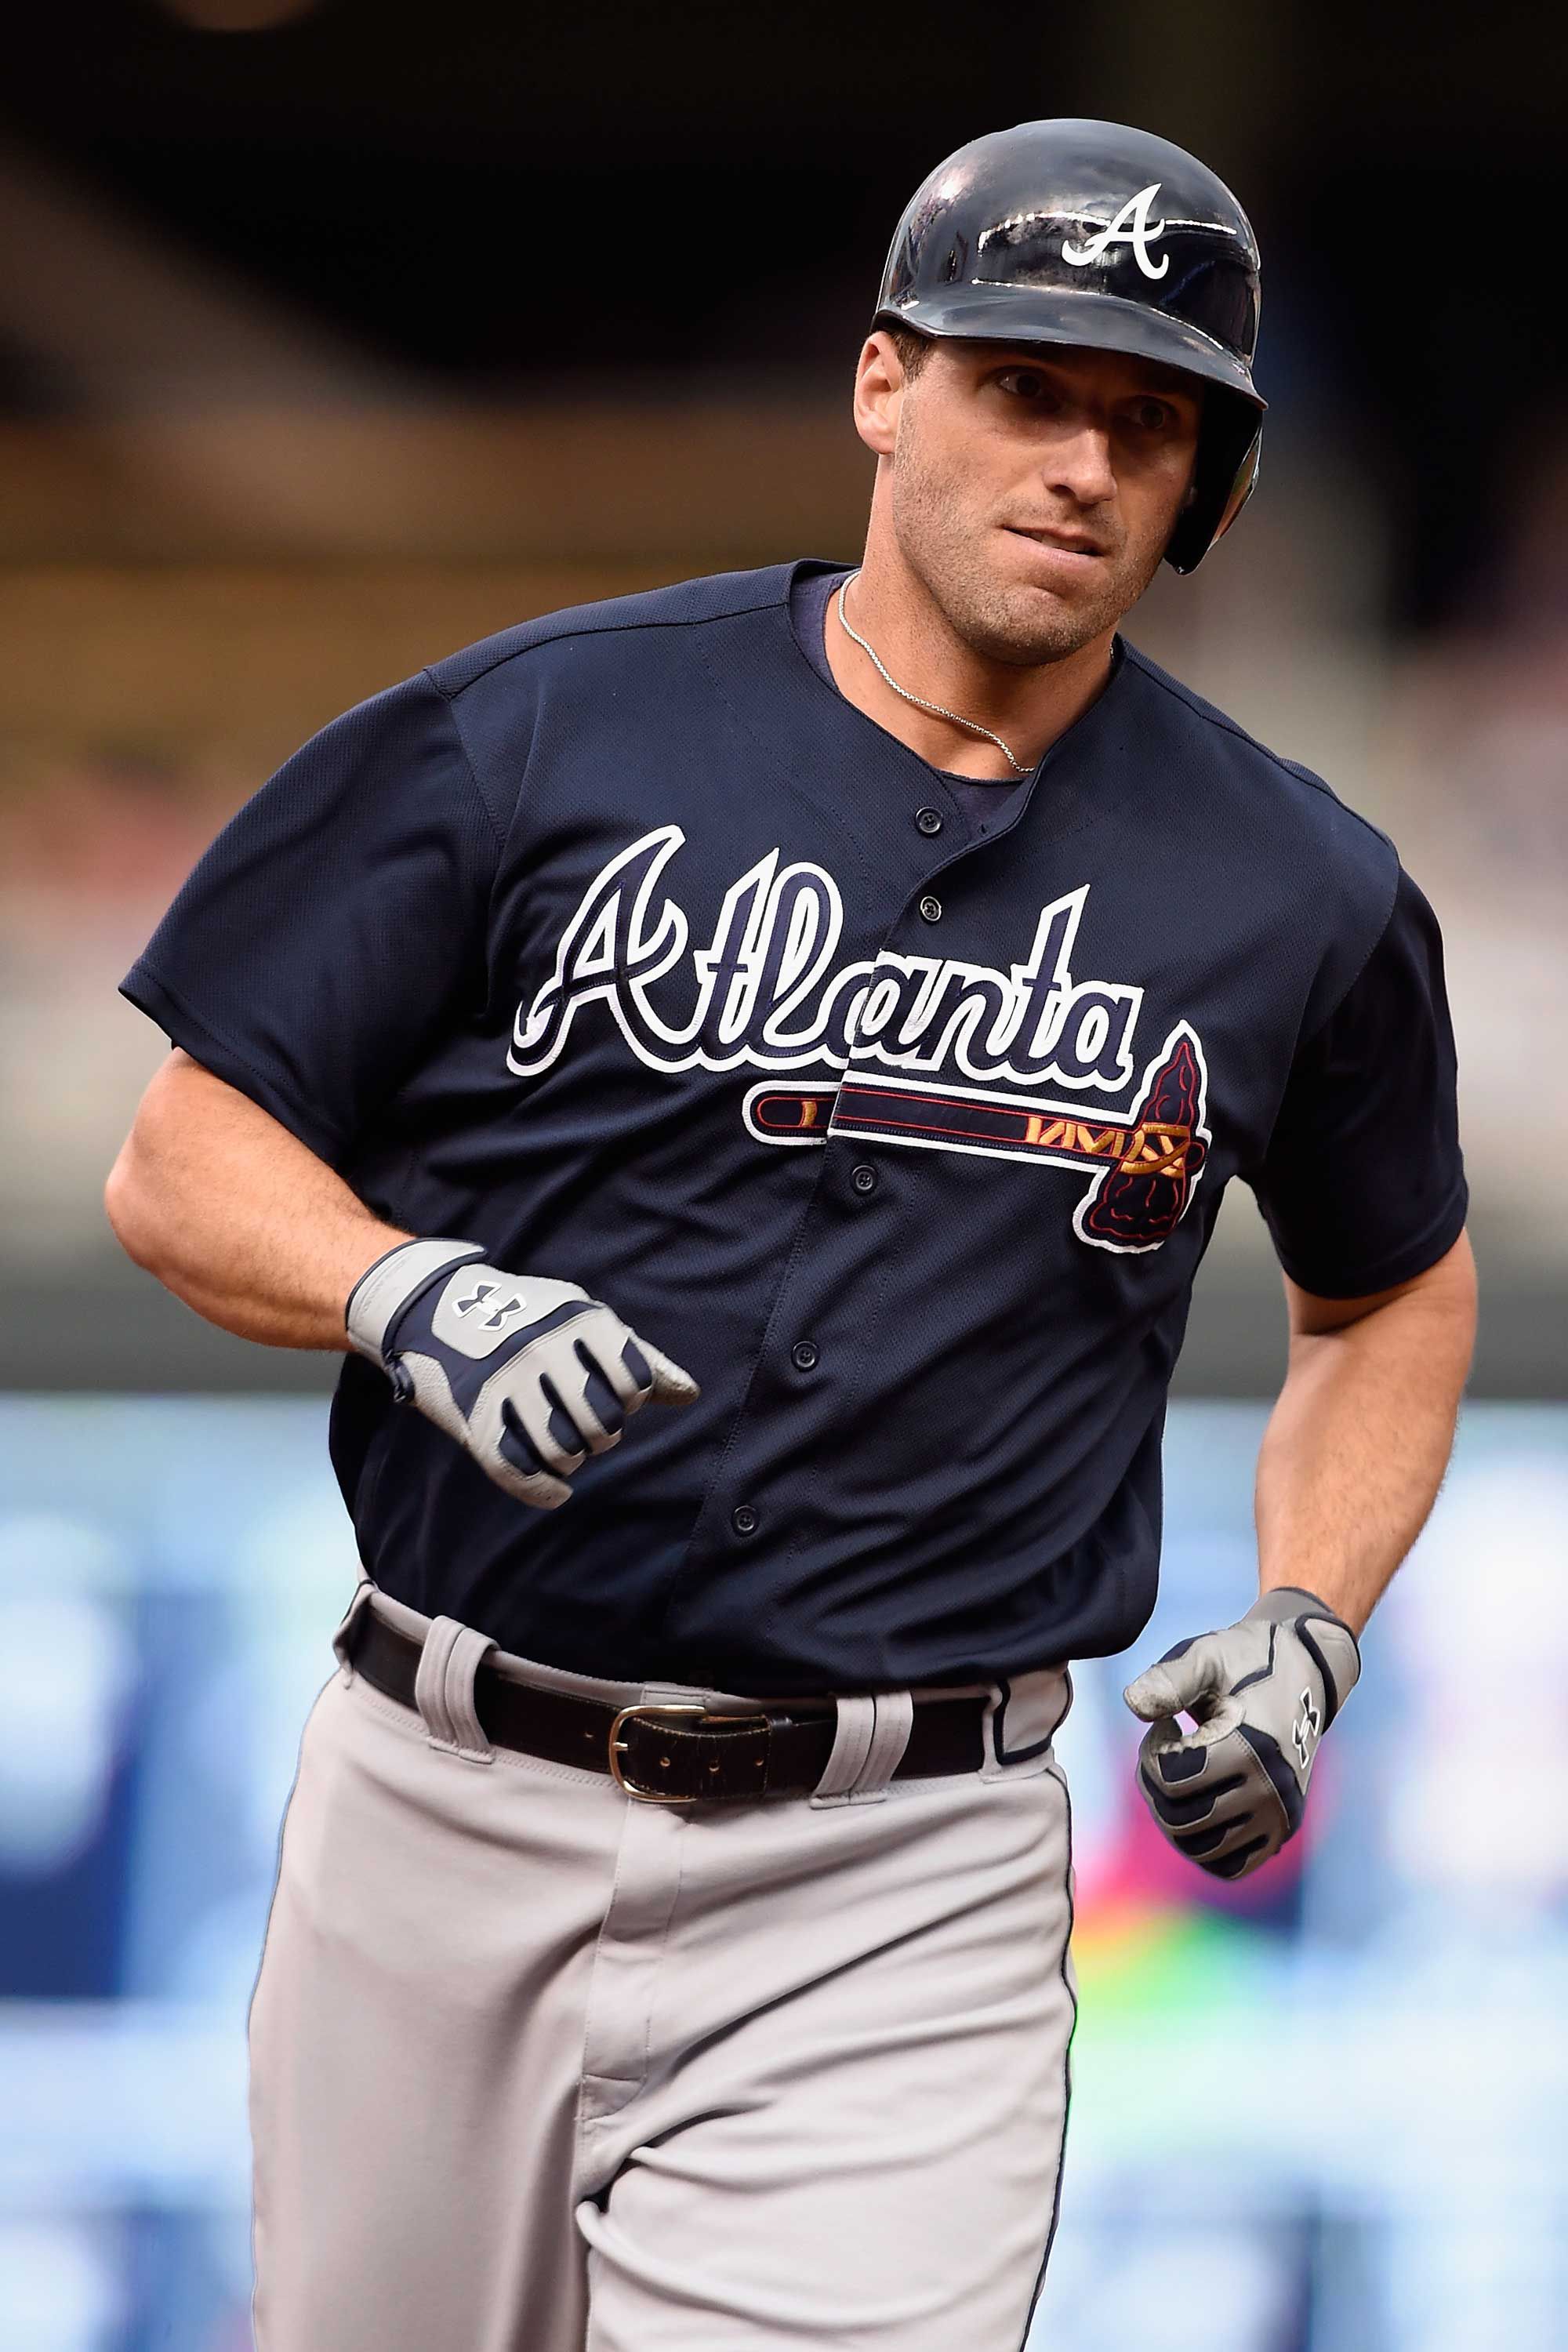 Best-looking MLB Players - Hottest Baseball Players. 